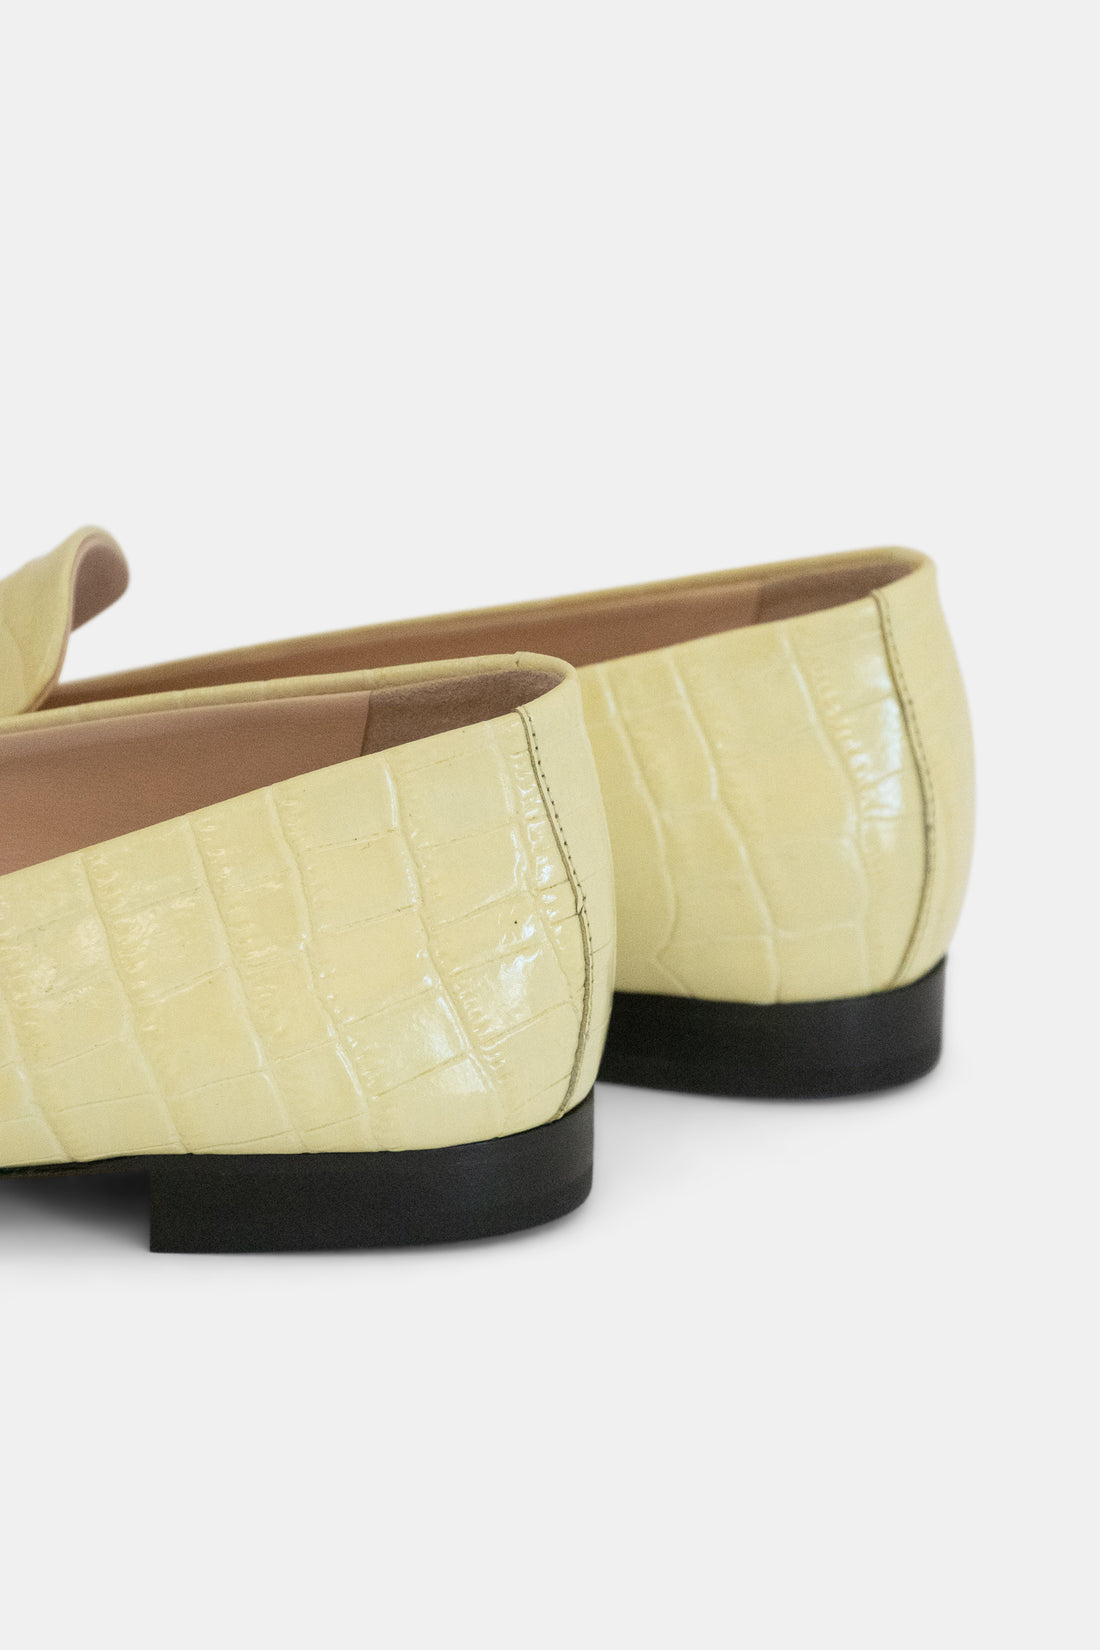 Round Toe Loafer Yellow Croco - Sample Size 37